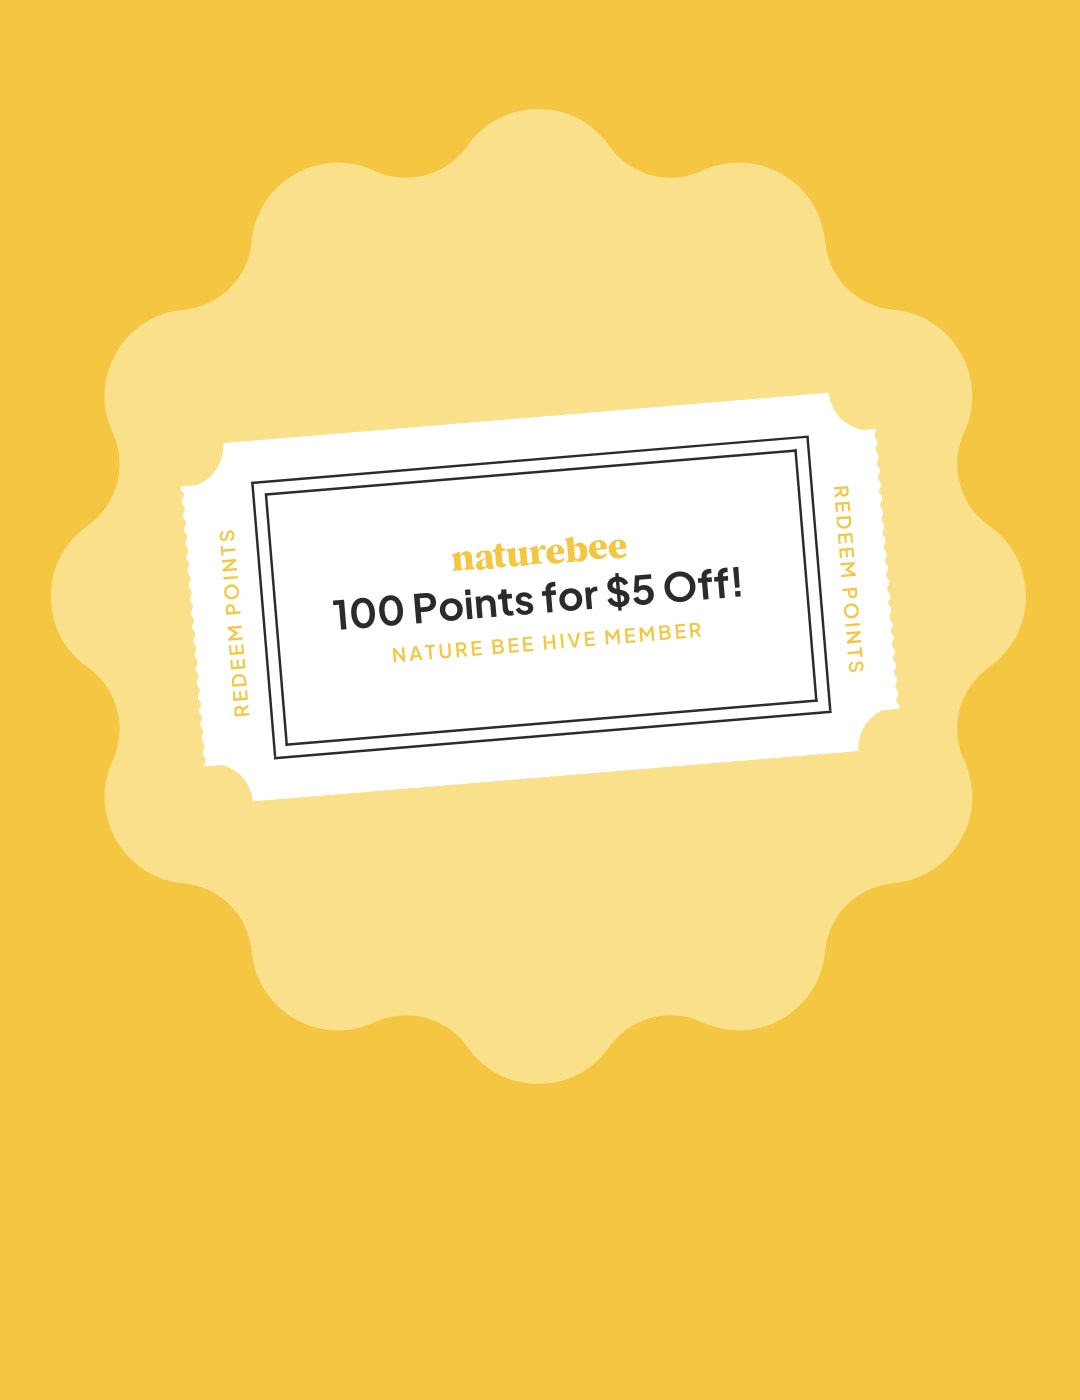 Yellow background with a lighter yellow icon in the middle. In the image is a ticket for Nature Bee's rewards program to redeem points. Redeem 100 points for $5 off your next order. 